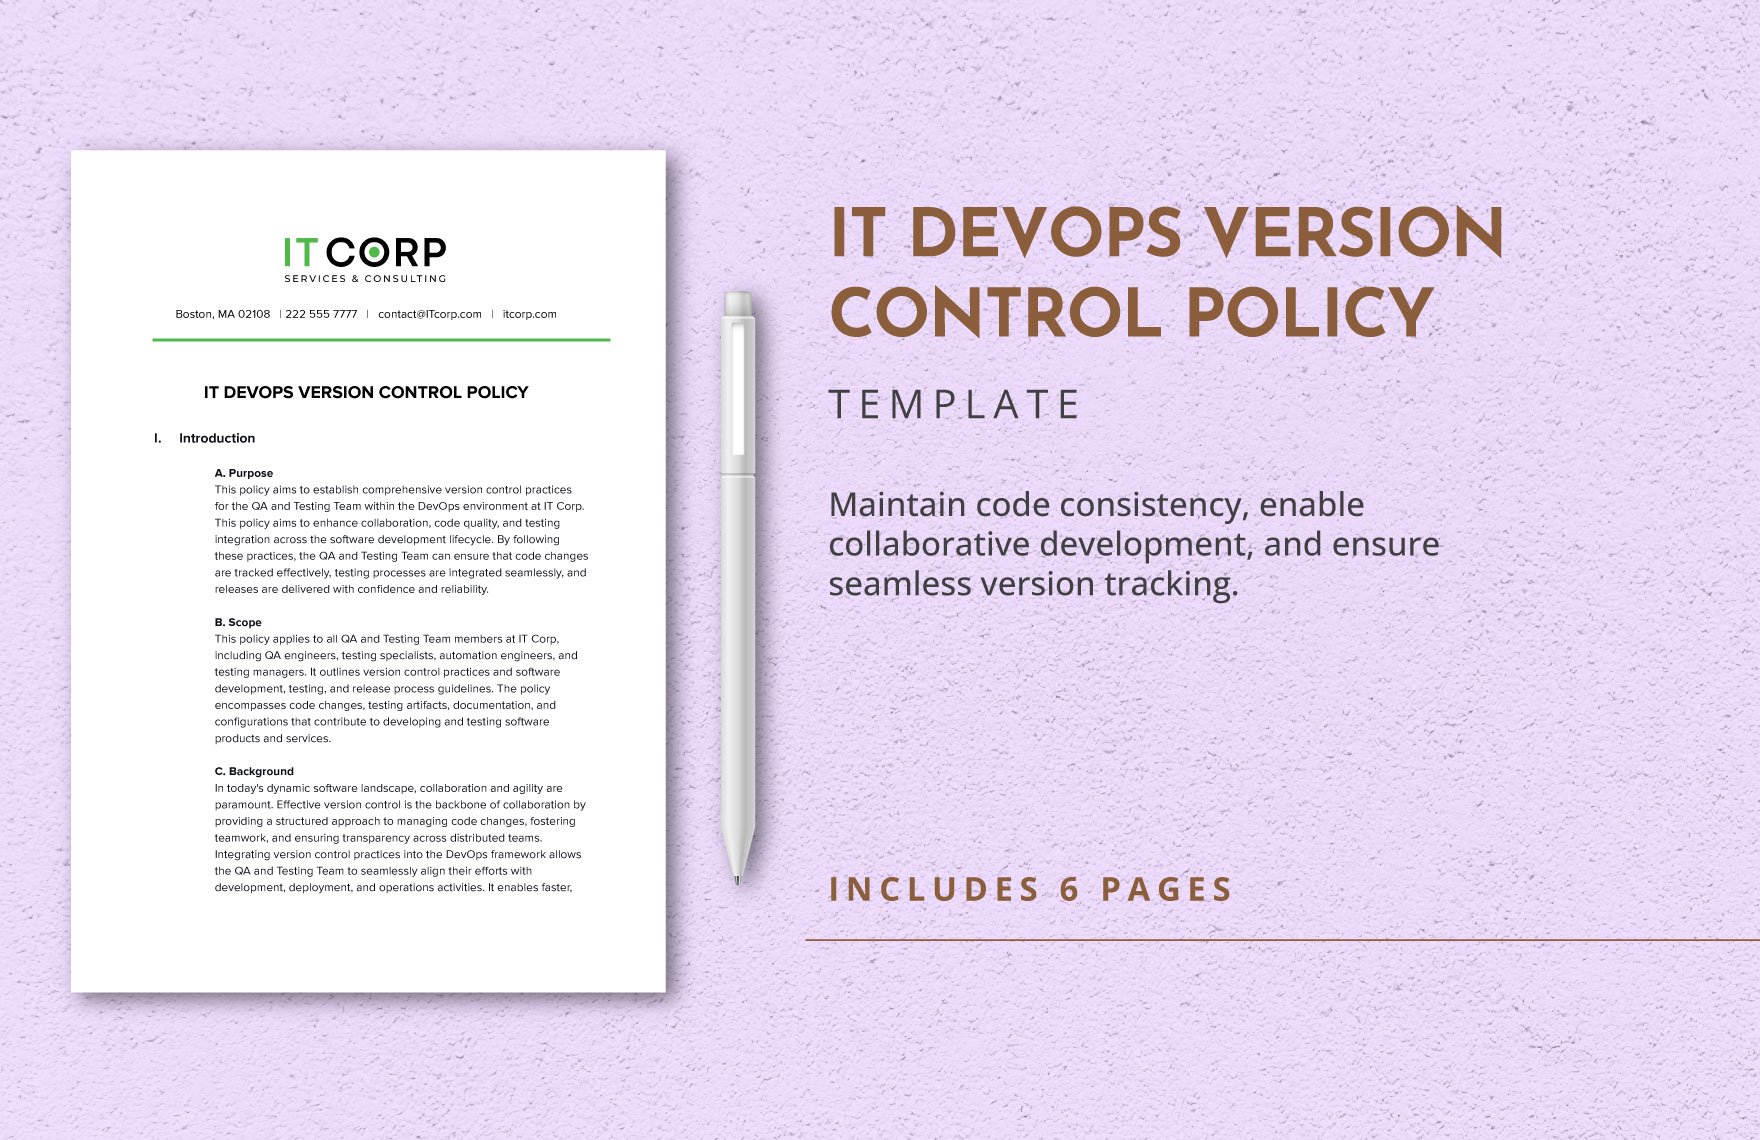 IT DevOps Version Control Policy Template